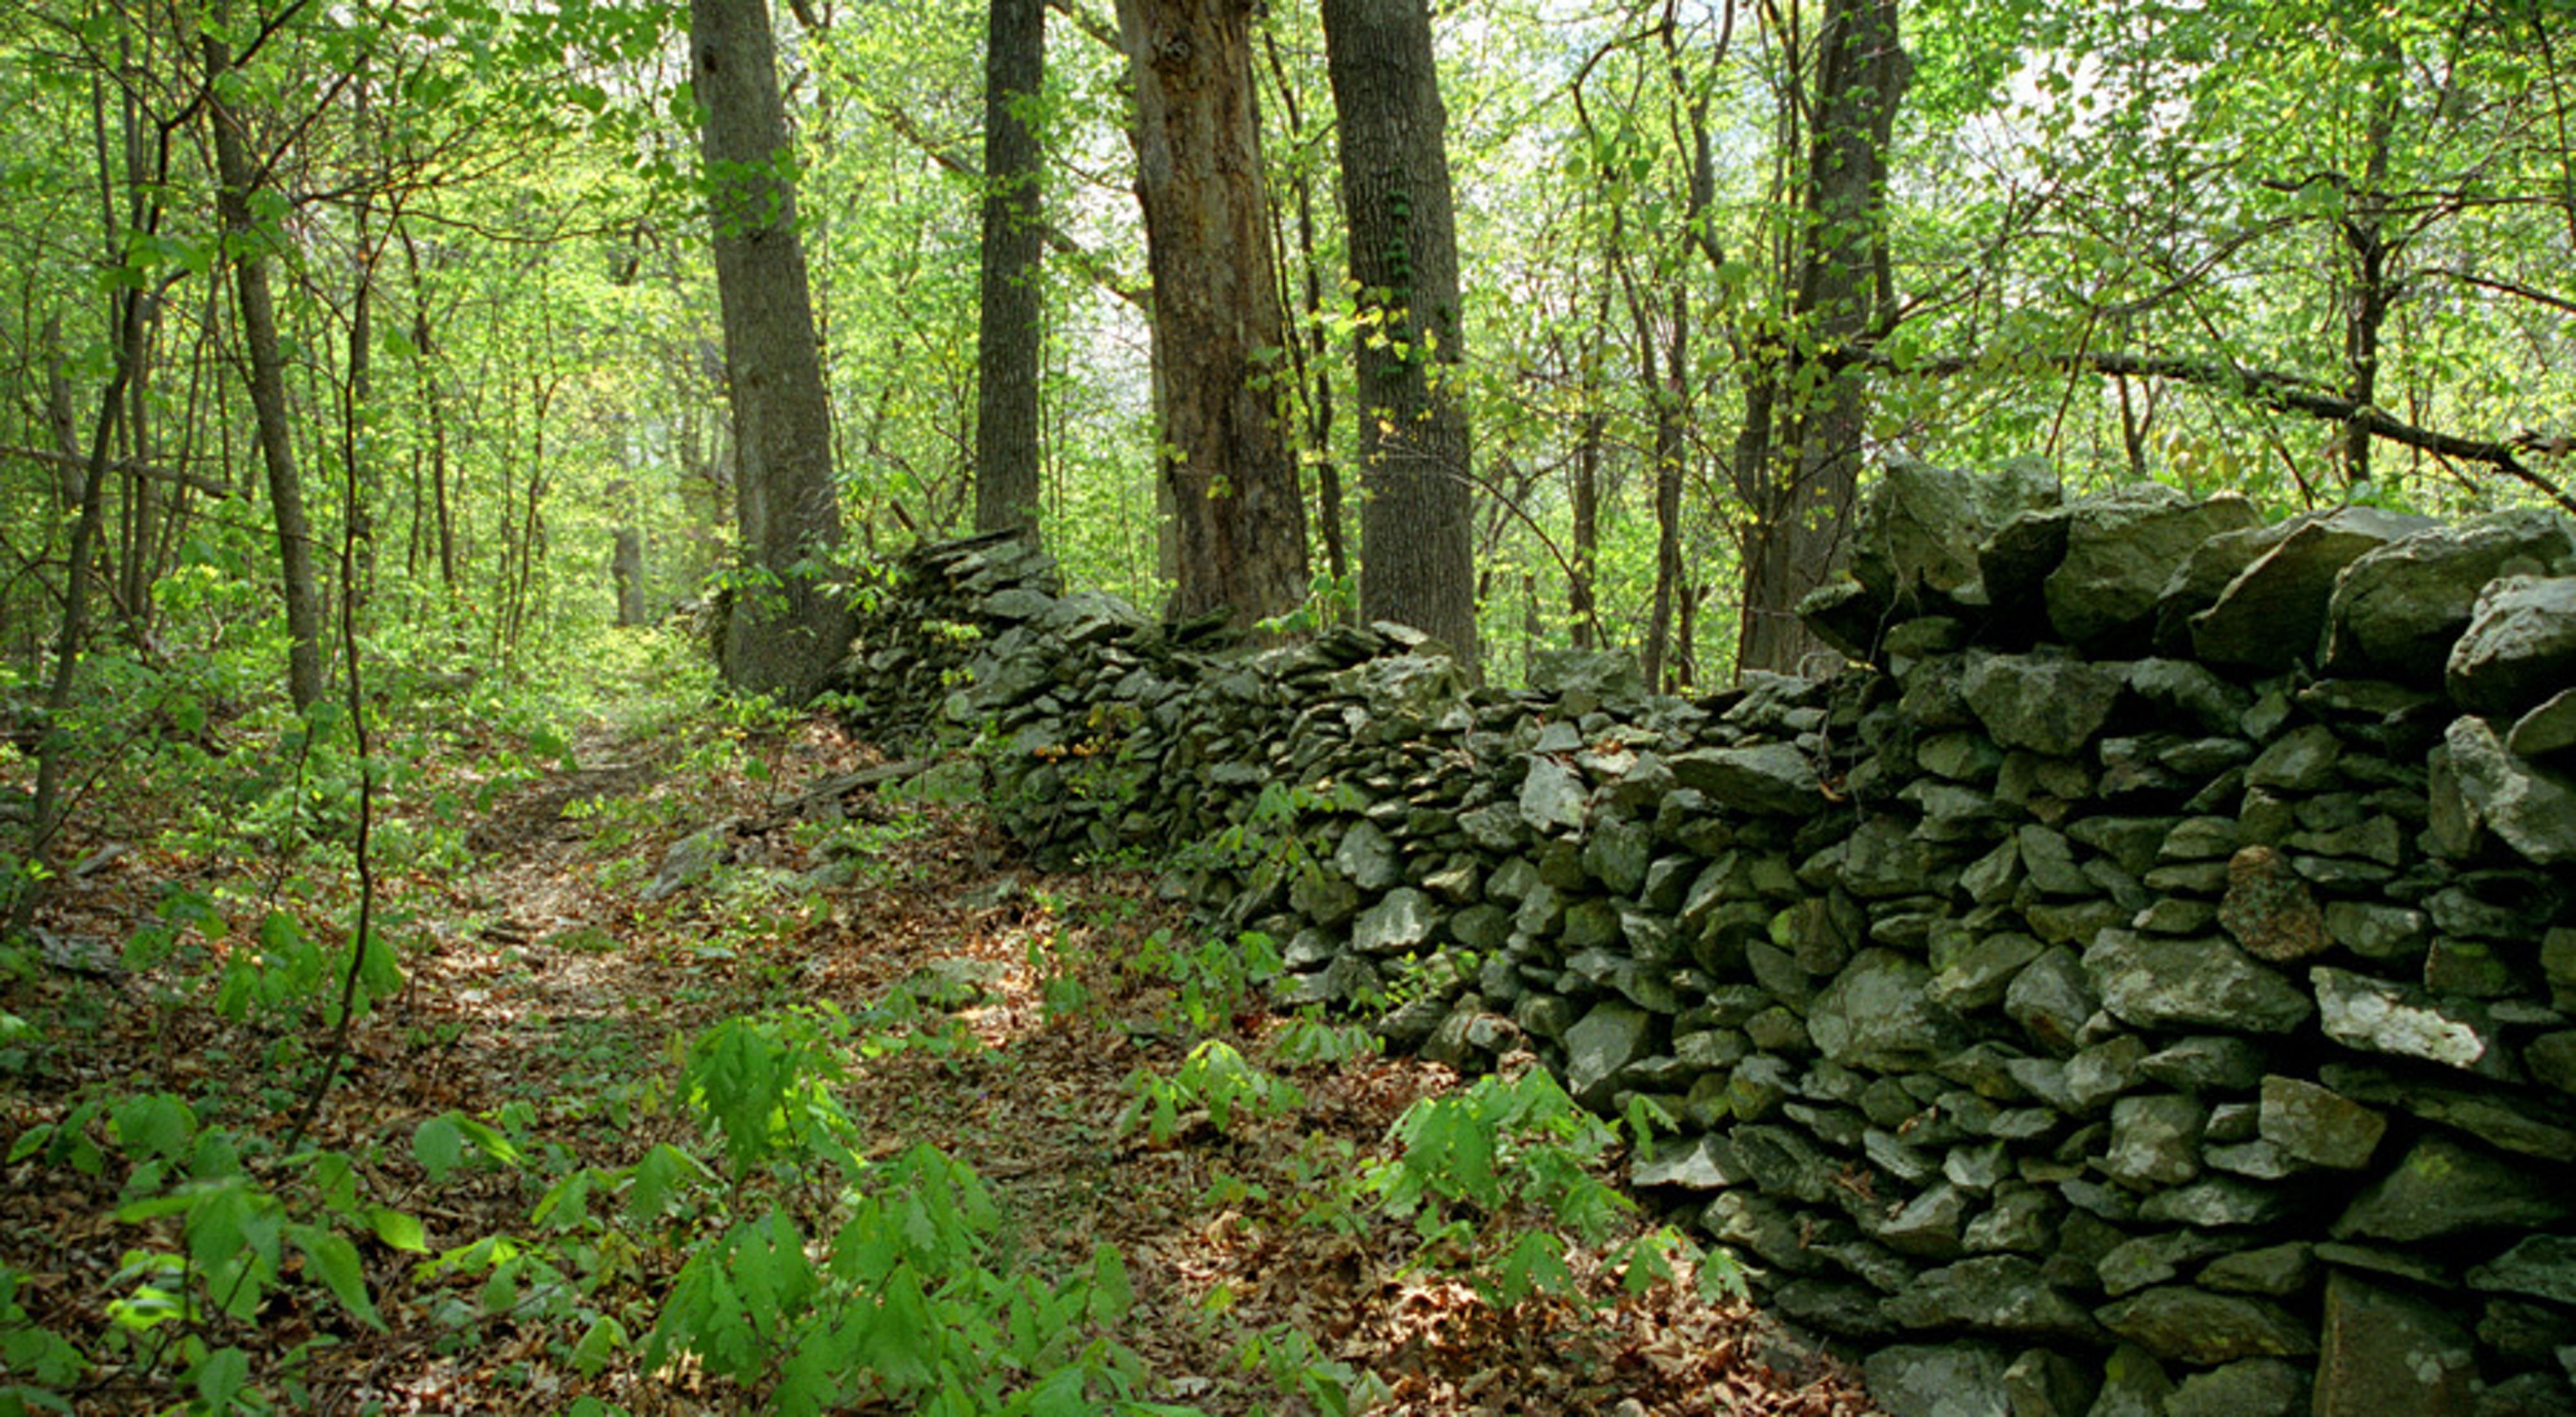 A rough rock wall stretches along a leafy, overgrown trail. The trail extends out of sight into the forest.